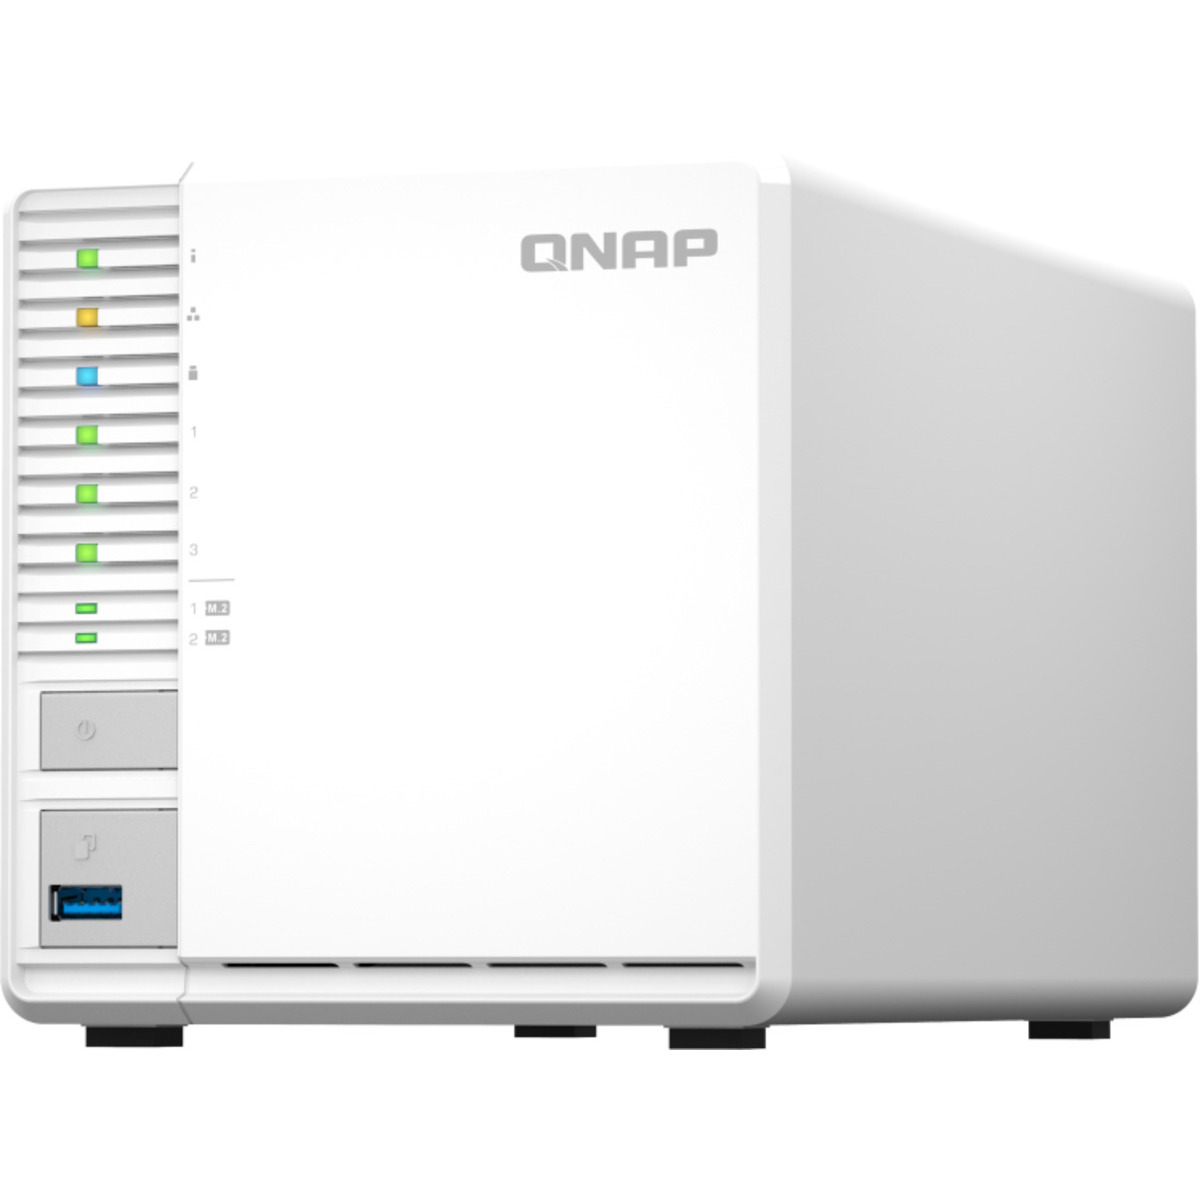 buy QNAP TS-364 12tb Desktop NAS - Network Attached Storage Device 3x4000gb Toshiba MN Series MN08ADA400E 3.5 7200rpm SATA 6Gb/s HDD NAS Class Drives Installed - Burn-In Tested - ON SALE - nas headquarters buy network attached storage server device das new raid-5 free shipping simply usa TS-364